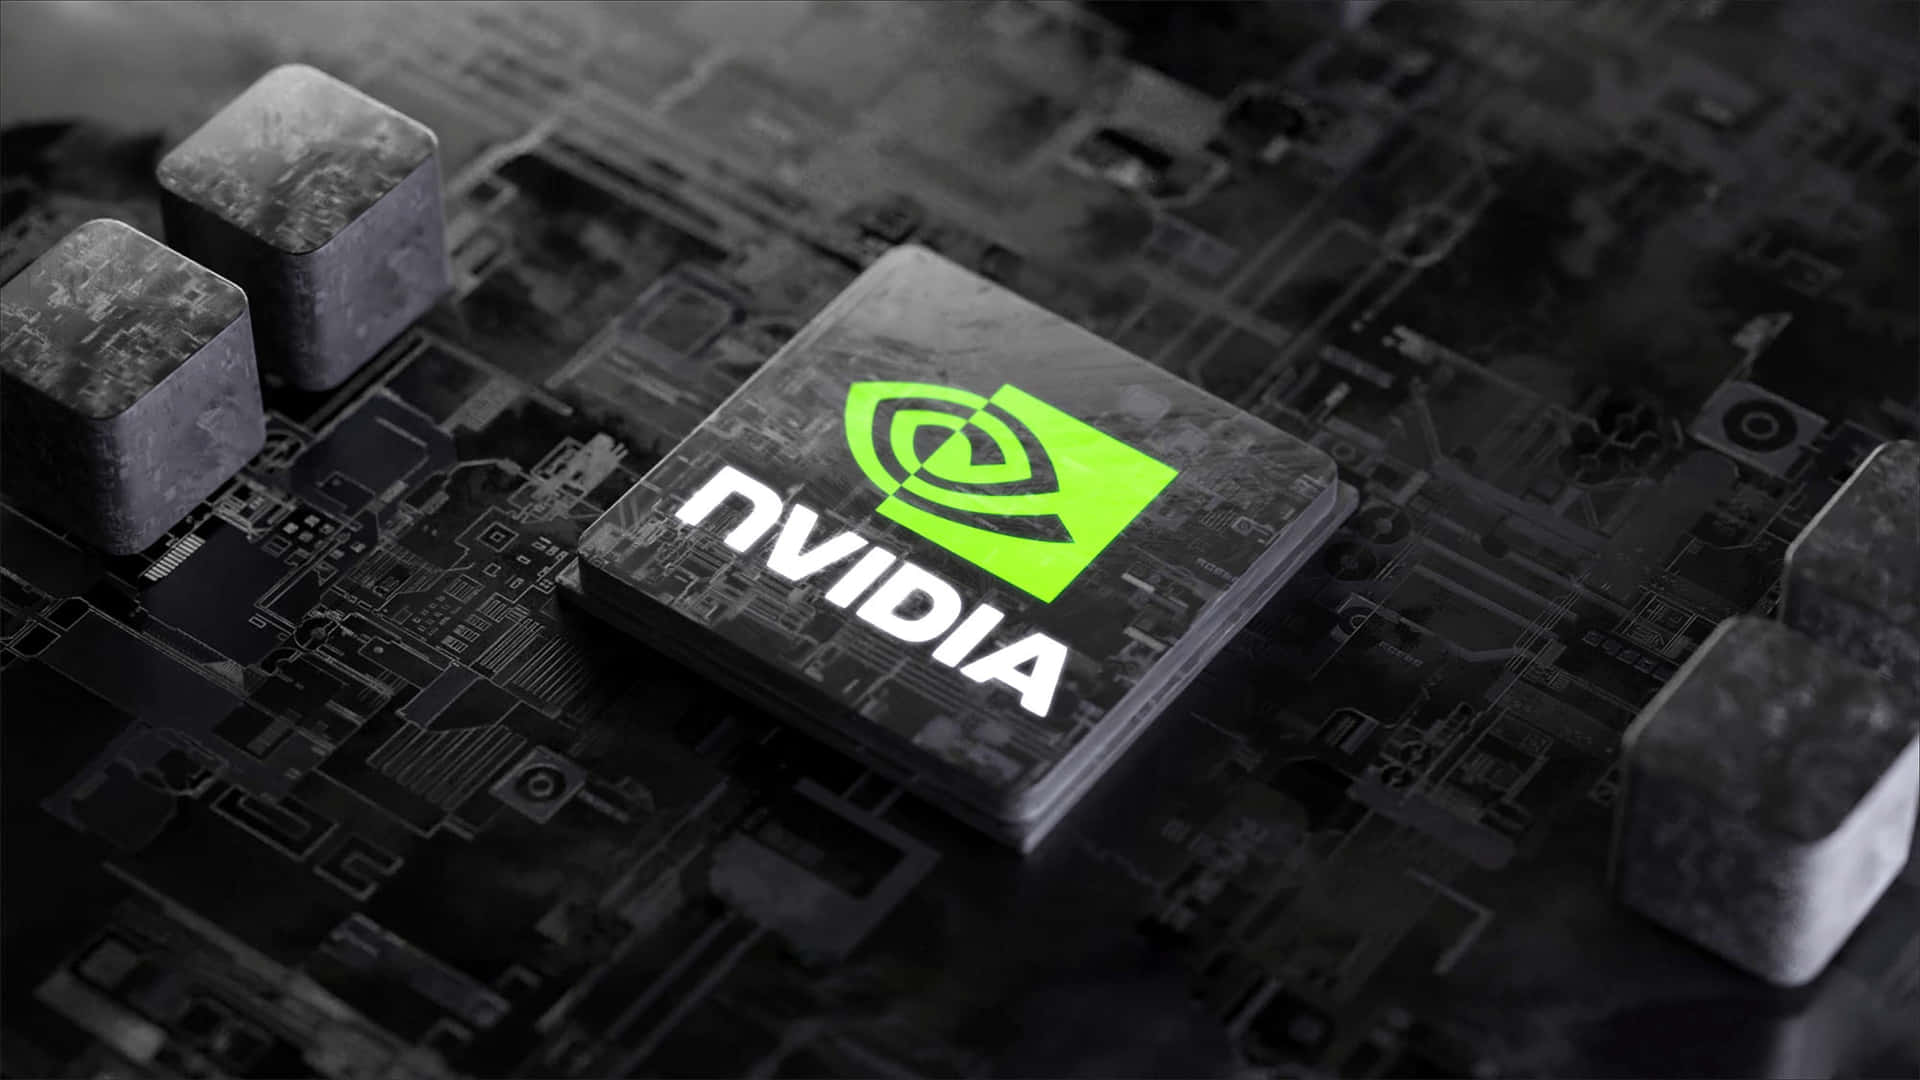 Experience High-Level PC Computing with NVIDIA